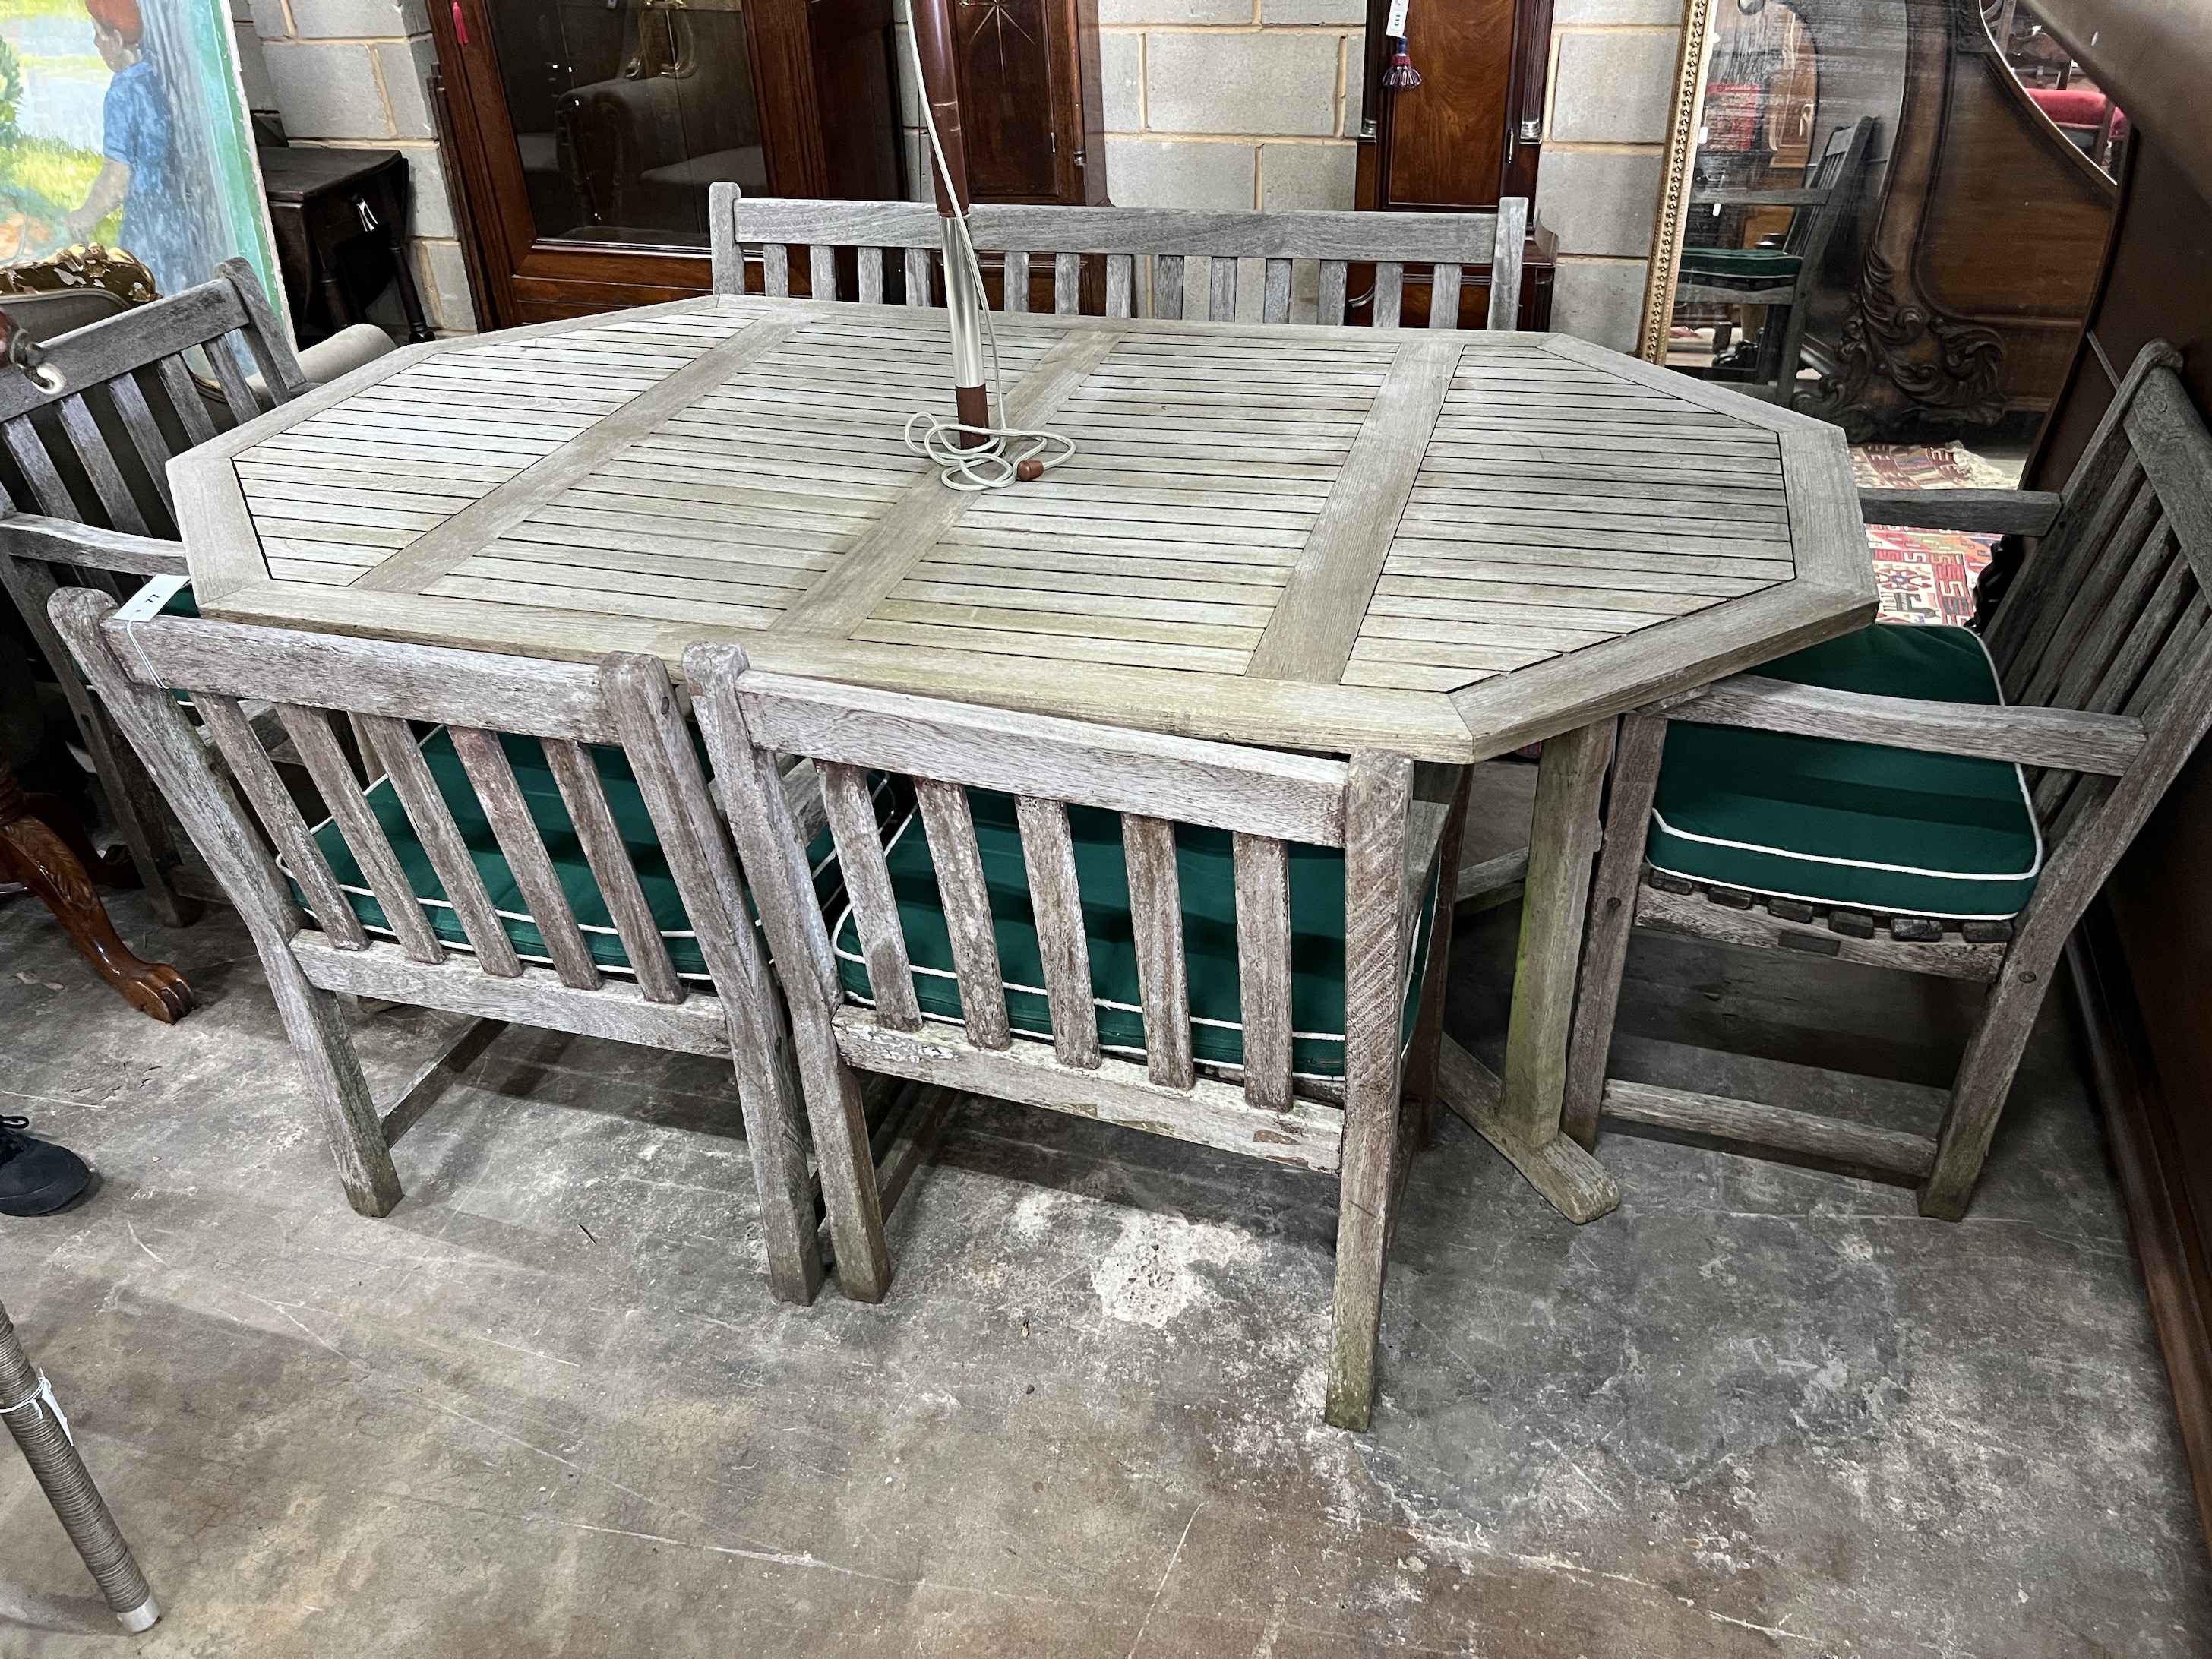 An Alexandra Rose weathered teak octagonal garden table, length 210cm, width 122cm, height 74cm, a bench, four elbow chairs with seat pads, and a green canvas parasol with cast metal base                                 